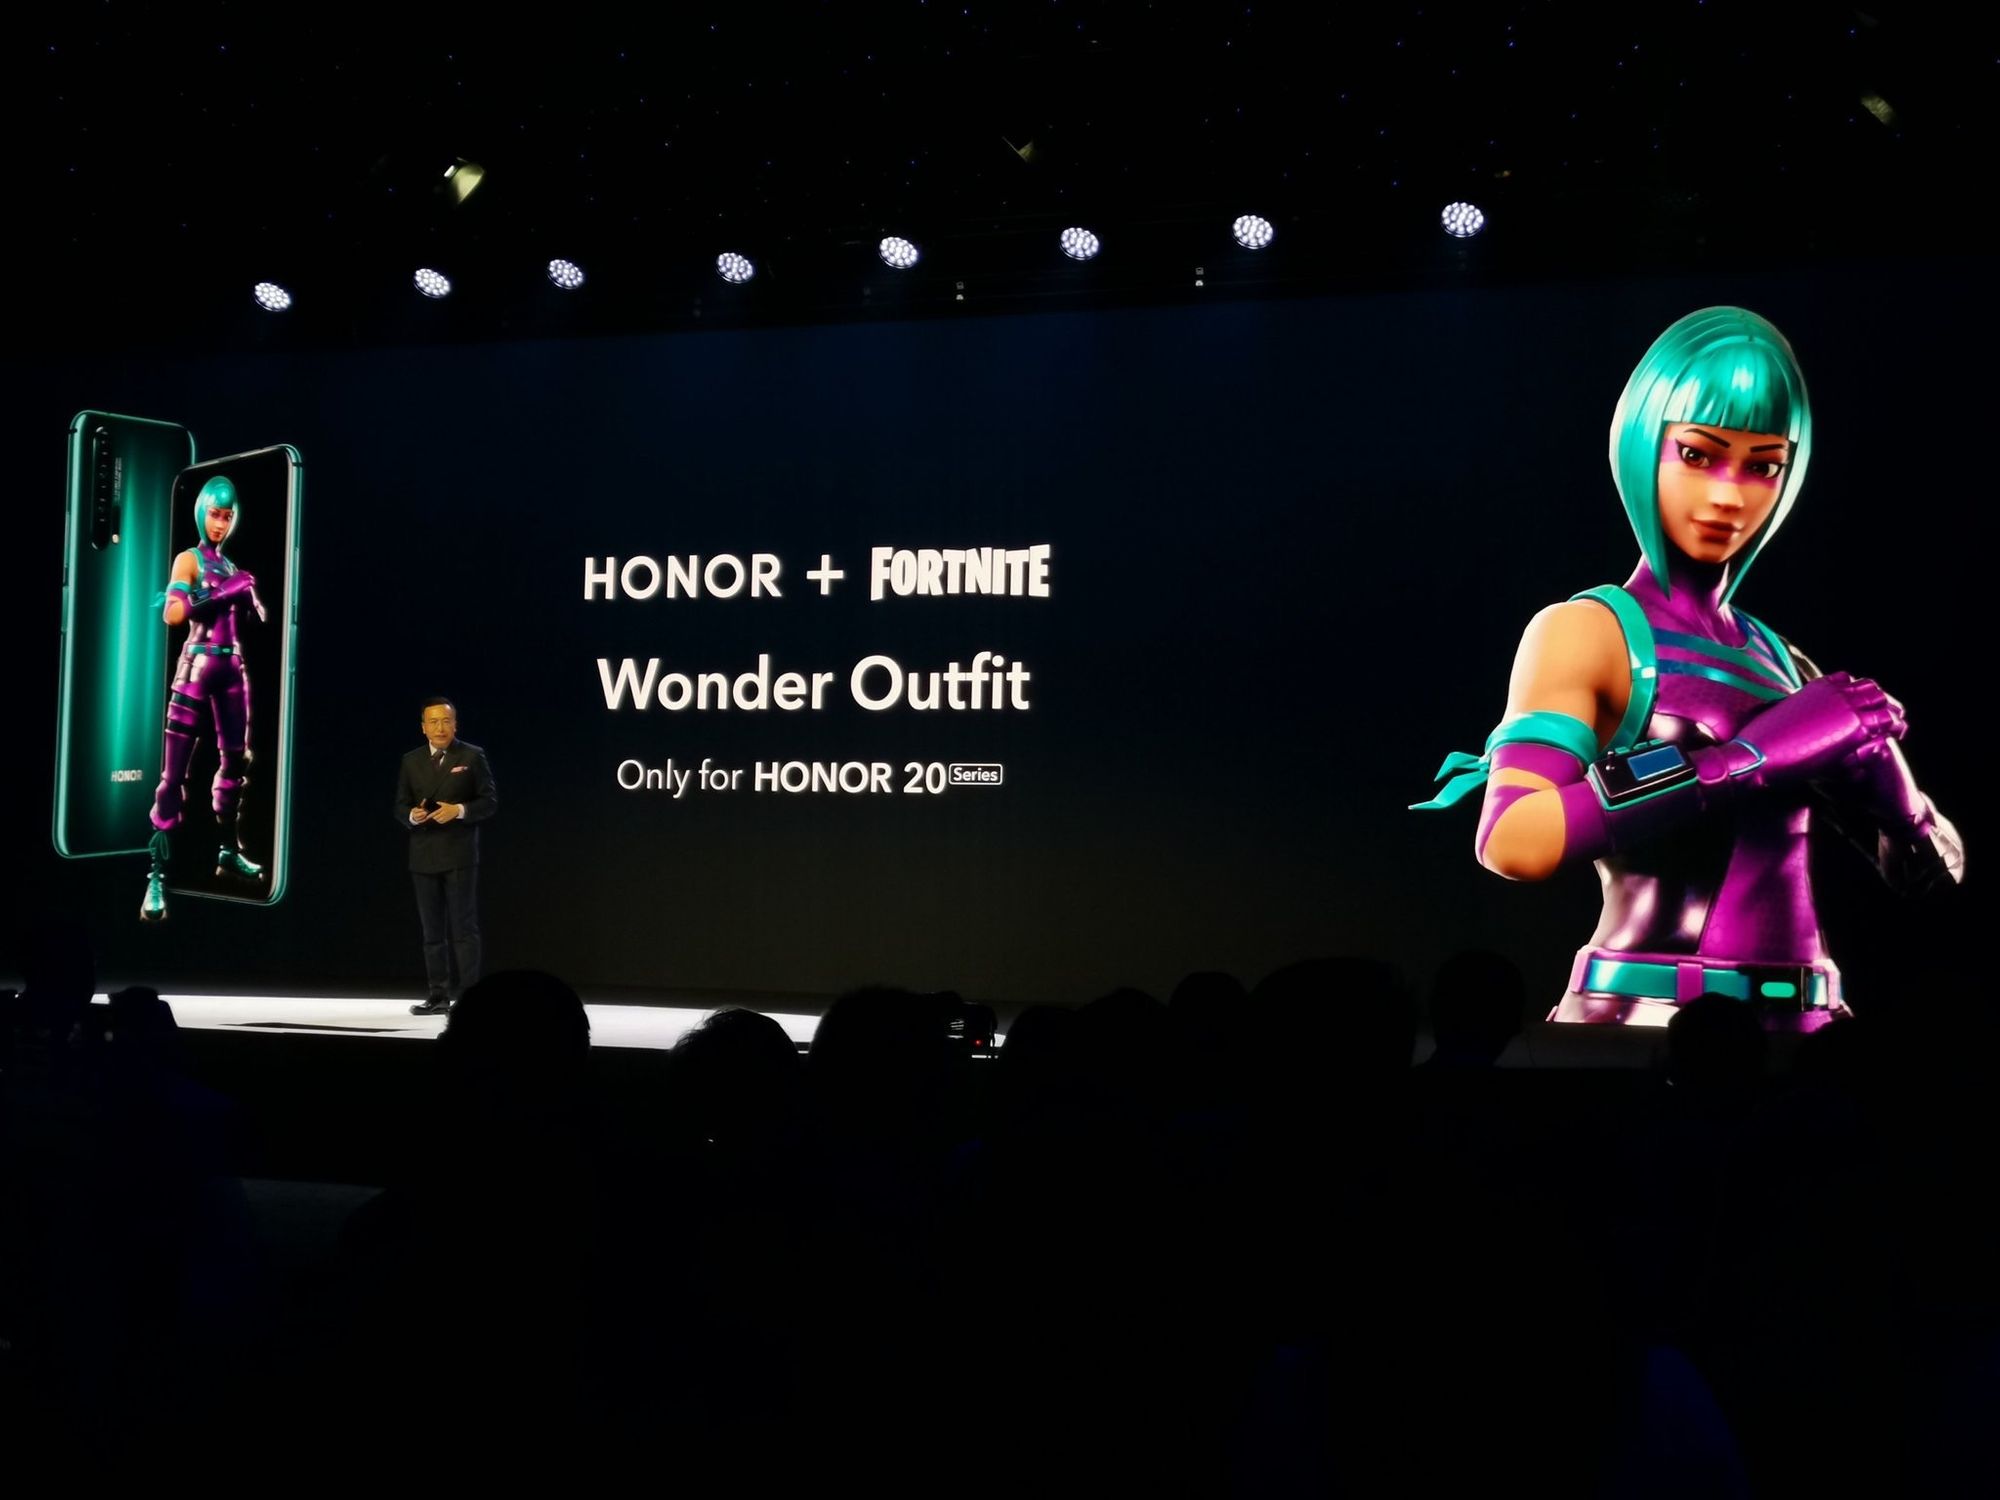 Exclusive Wonder Outfit Announced for Fortnite | Fortnite News